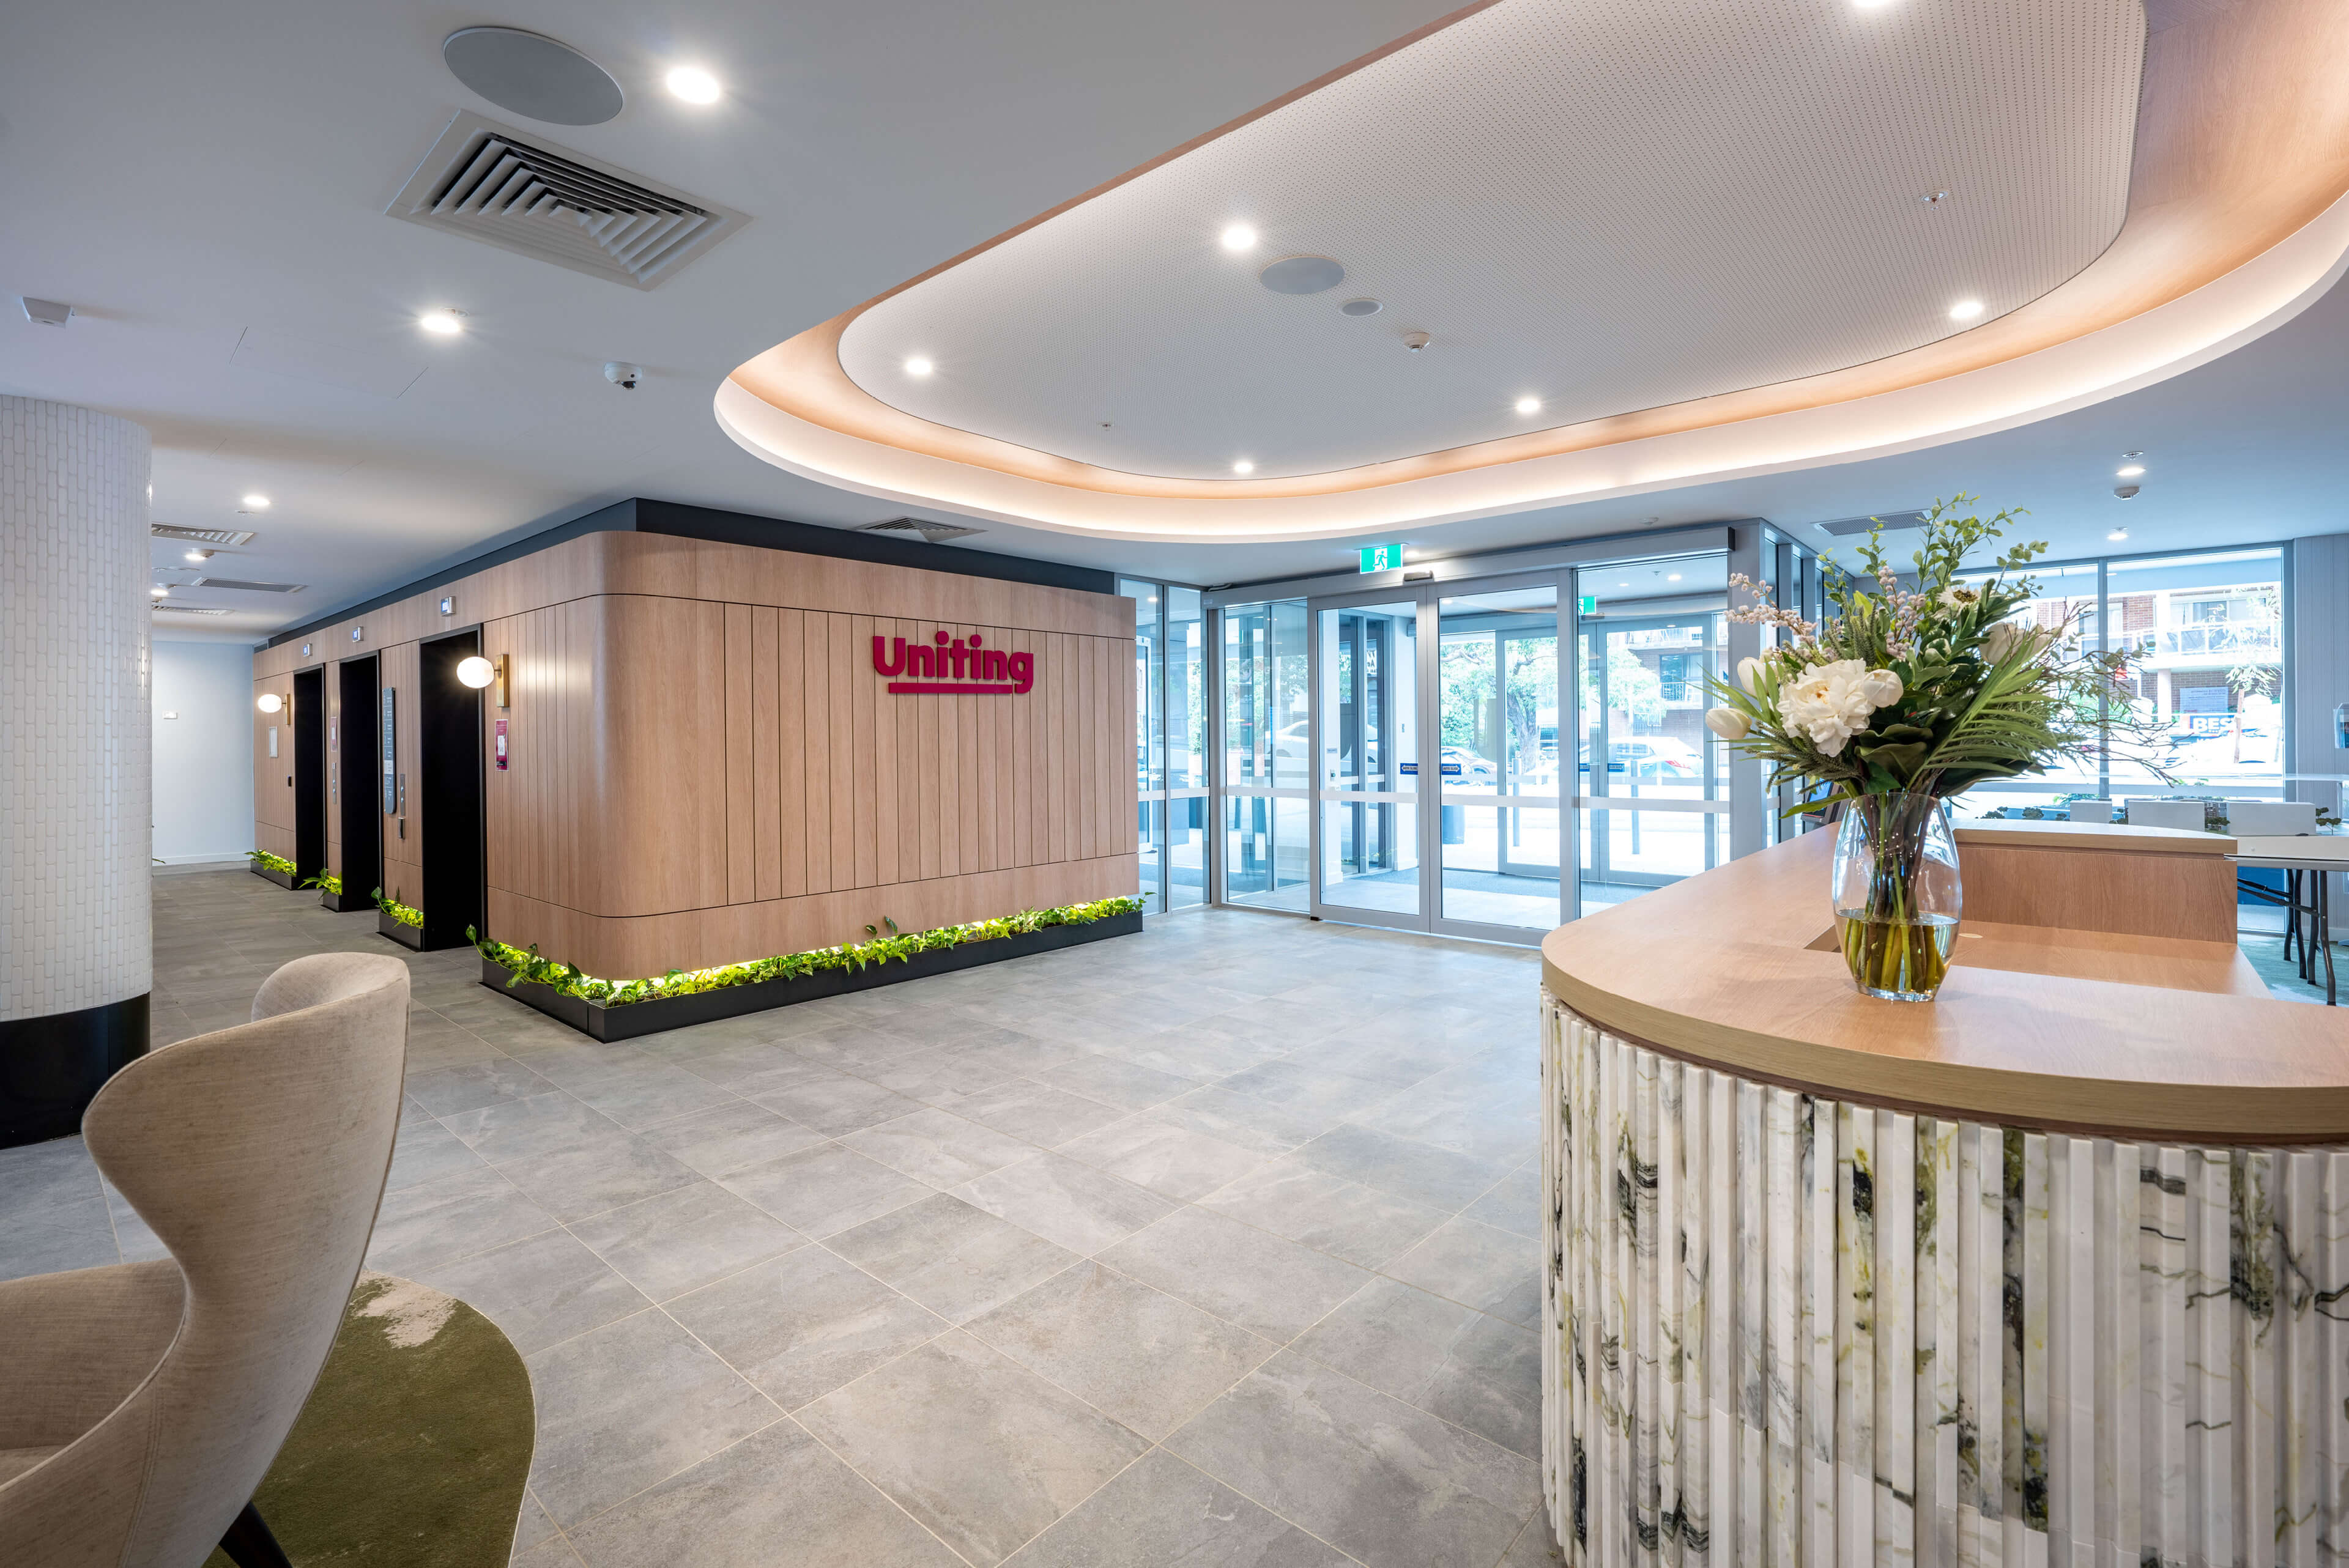 3 foyer and main reception at uniting mayflower westmead taylor construction aged care